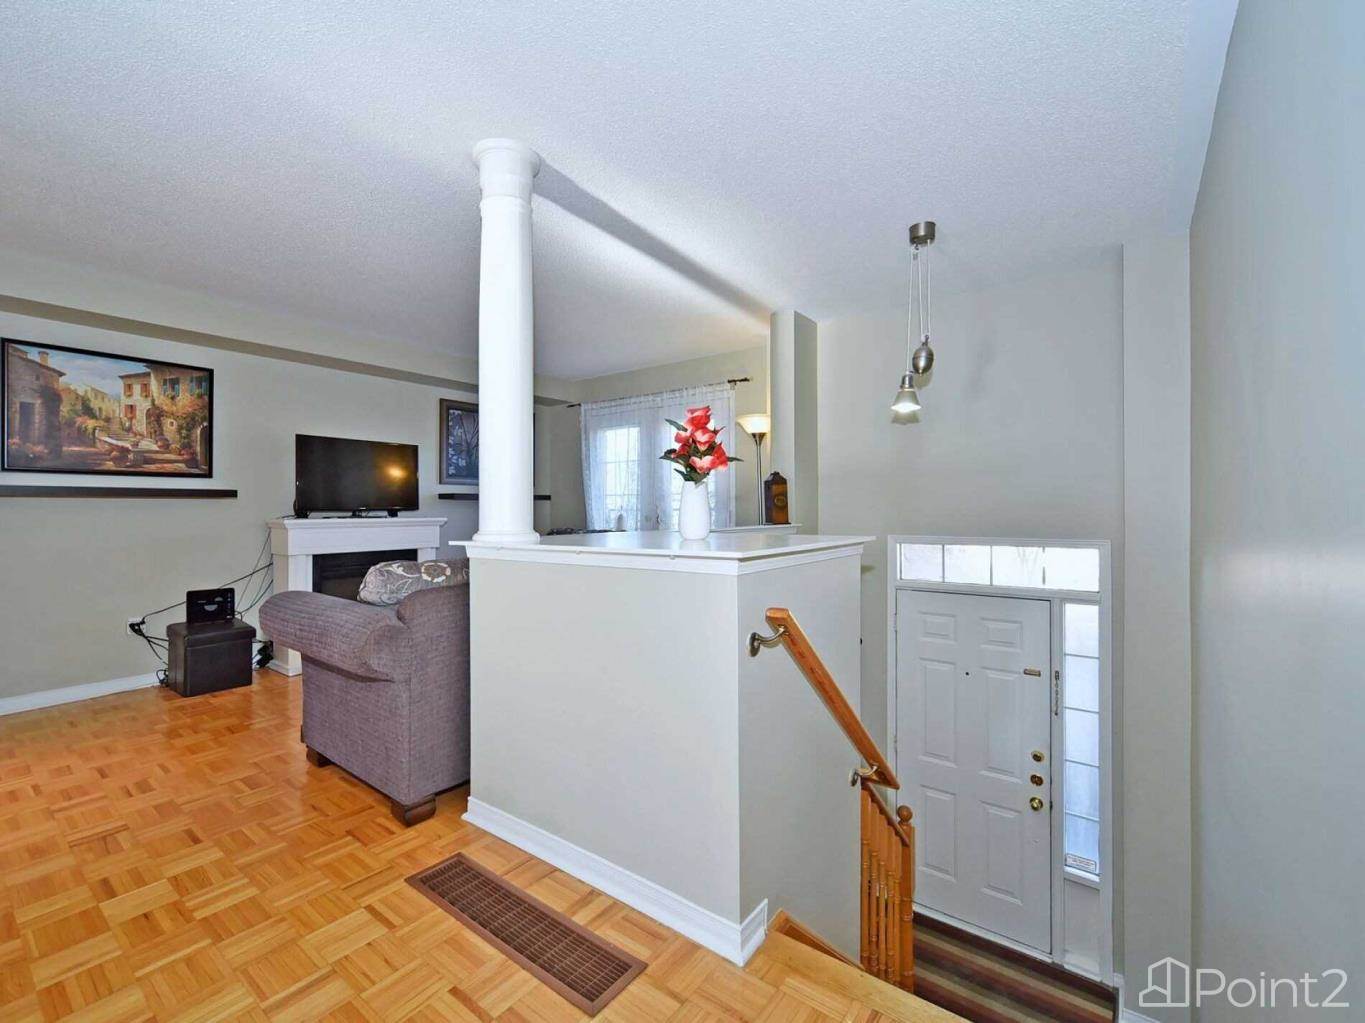 19 Foxchase Ave Vaughan Ontario L 4 L 9 N 1, Vaughan, ON L4L9N1 Photo 3